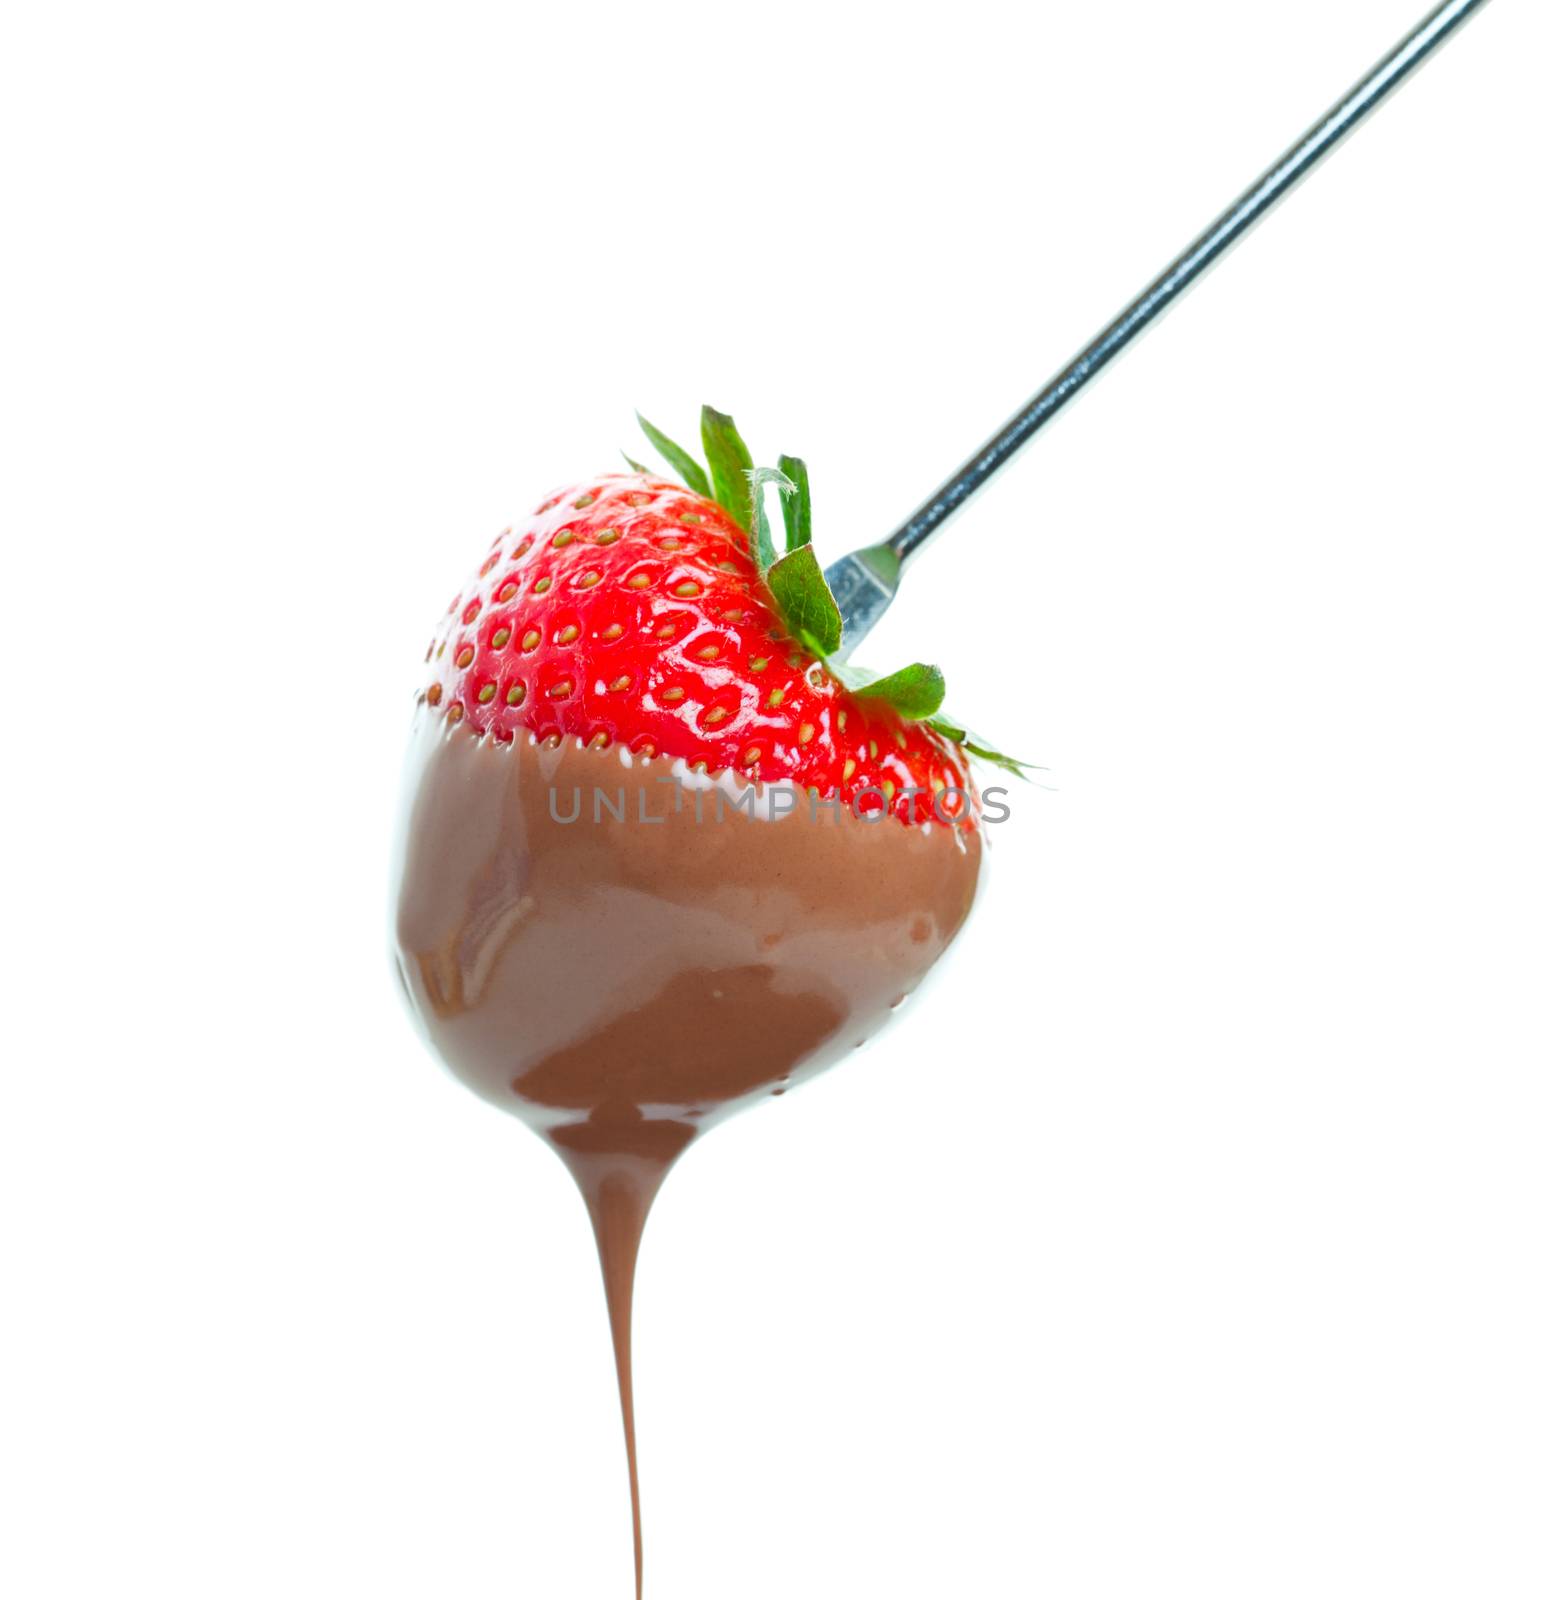 A sweet ripe strawberry dripping with warm milk chocolate.  Shot on white background.